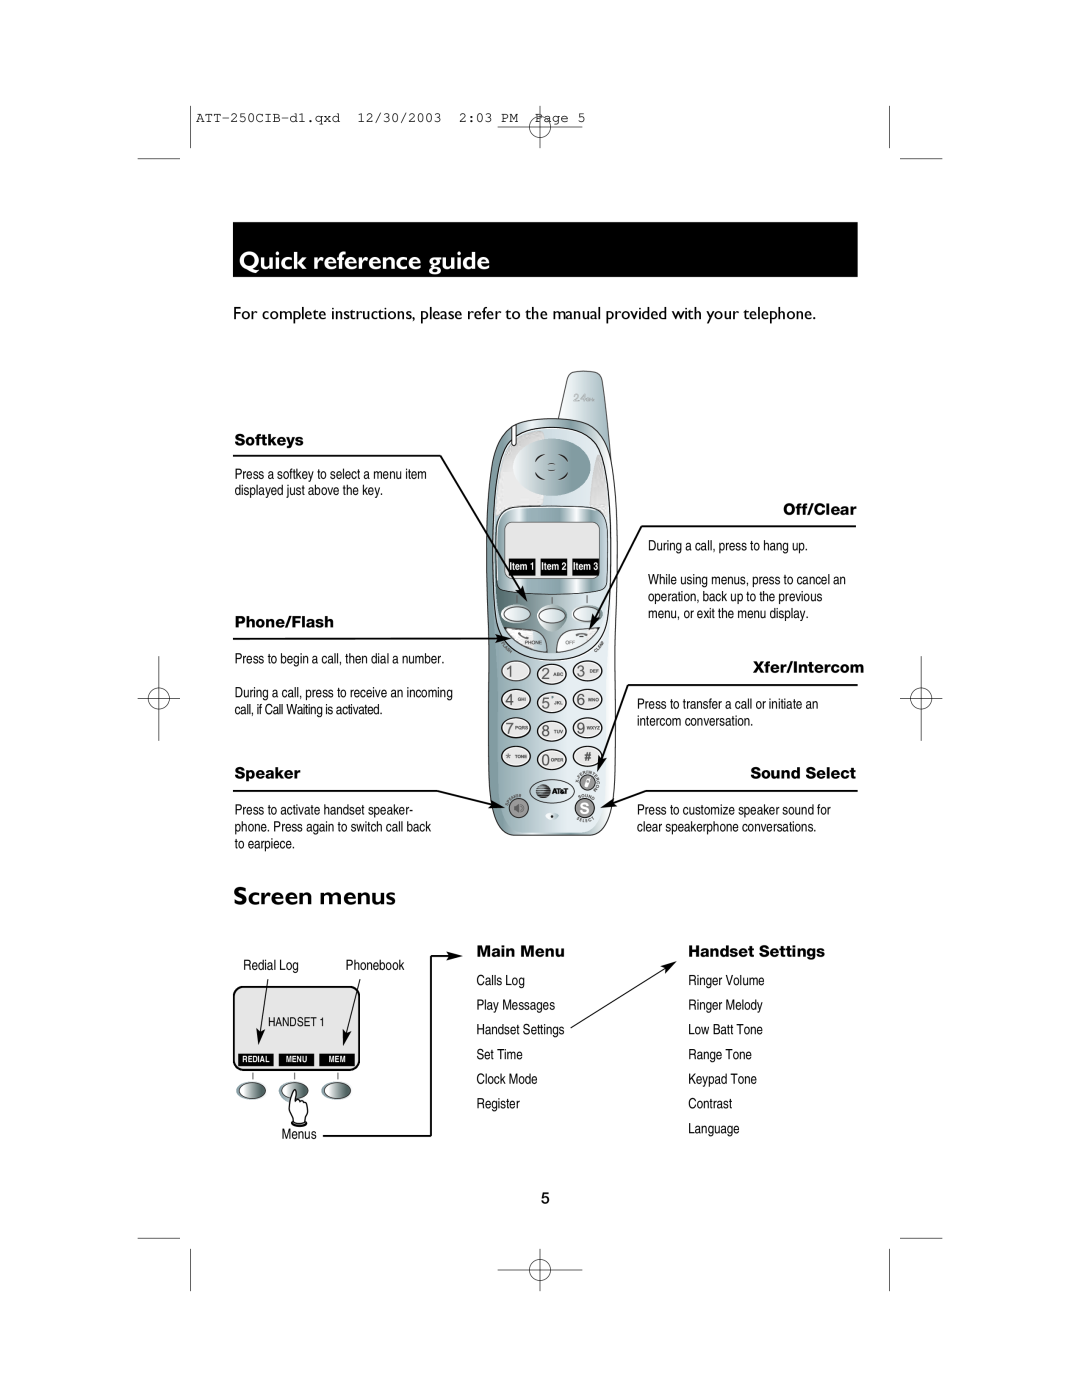 AT&T E250 Quick reference guide, Screen menus, Softkeys, Off/Clear, Phone/Flash, Xfer/Intercom, Speaker, Sound Select 